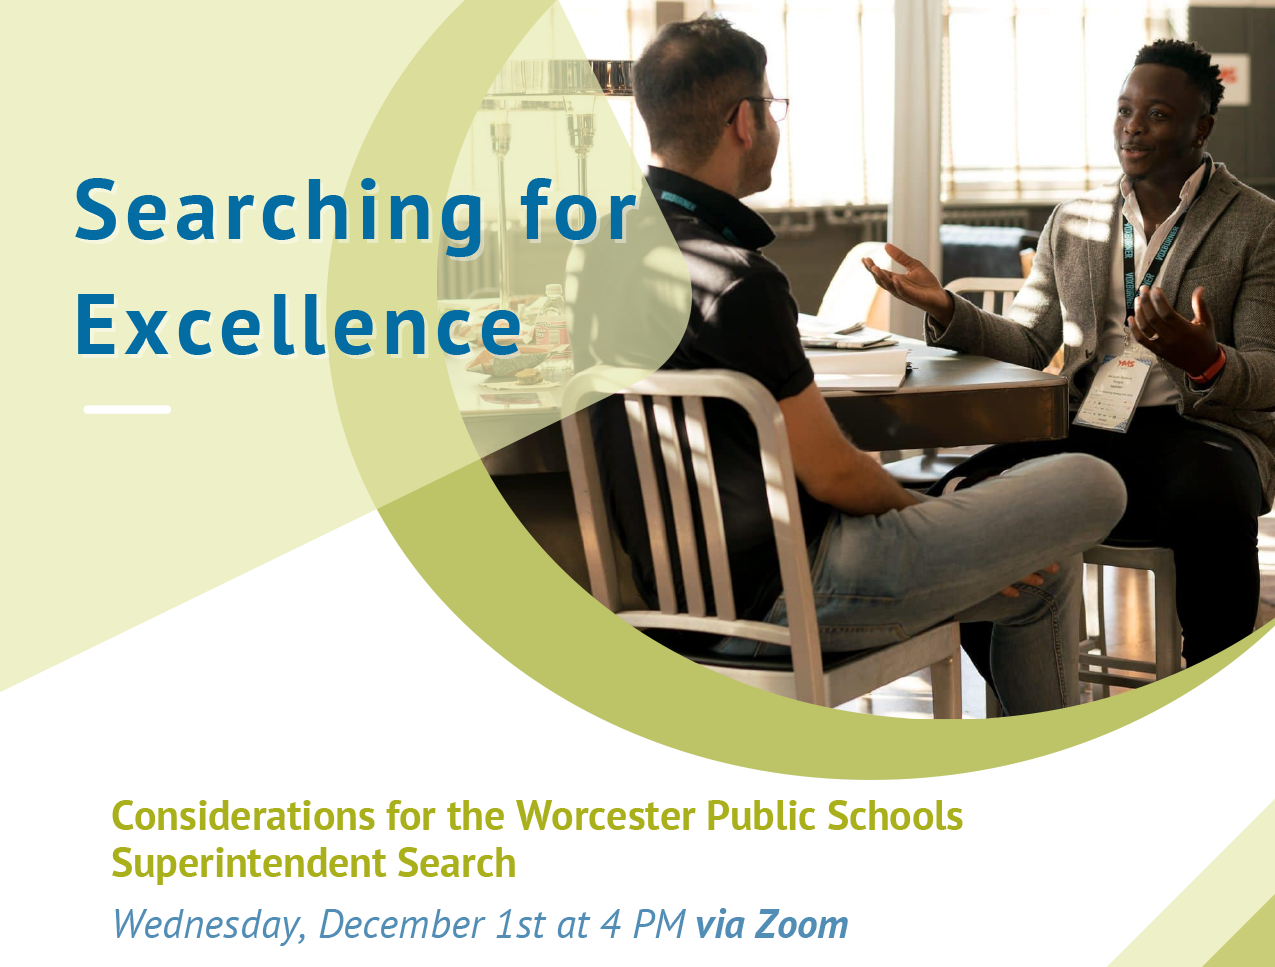 Searching for Excellence: Considerations for the Worcester Public Schools Superintendent Search